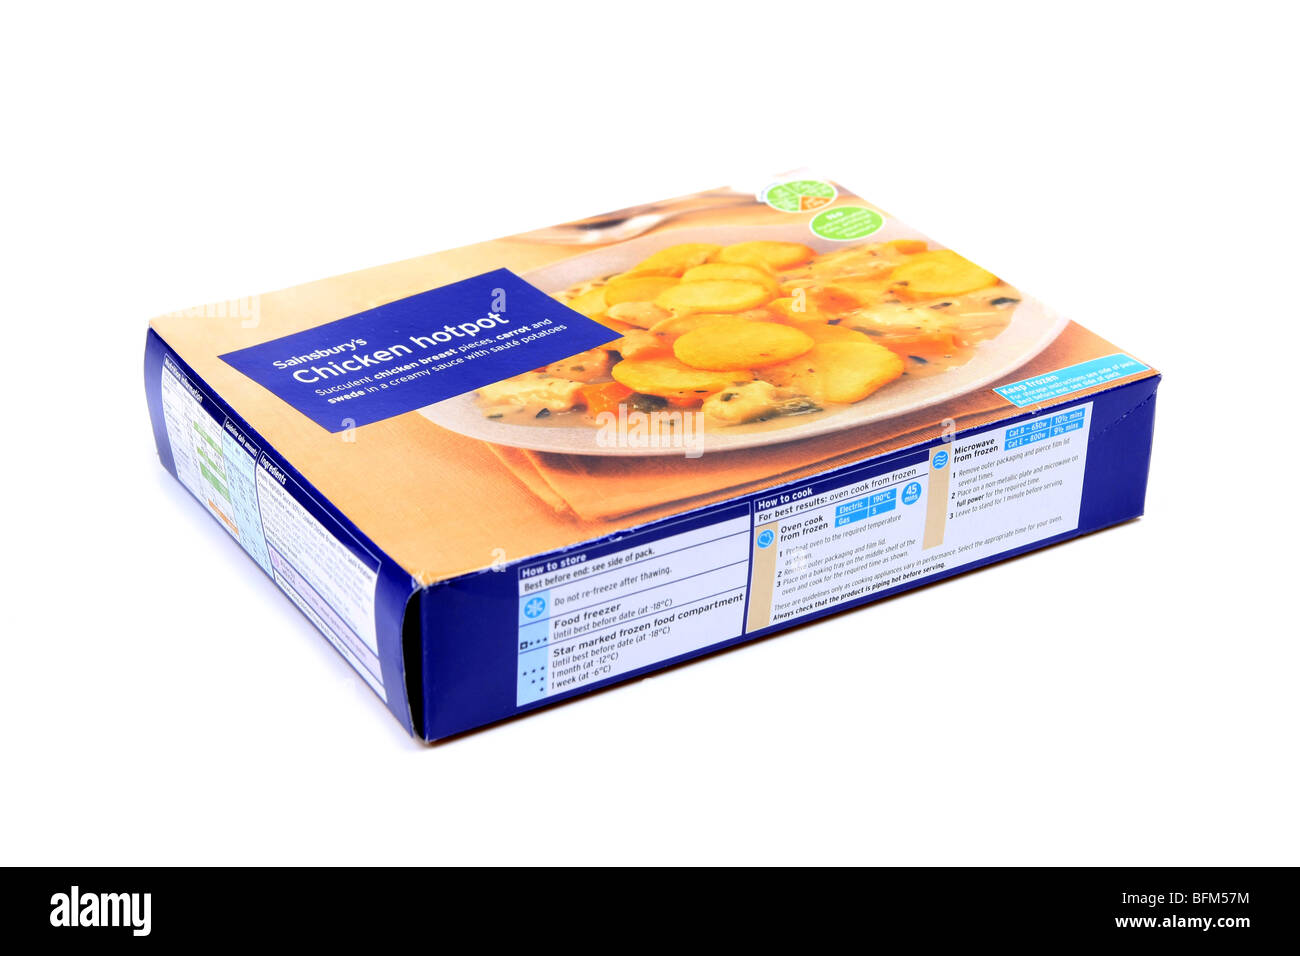 Frozen Chicken Hot Pot Ready Dinner cardboard packaging set against a white background Stock Photo